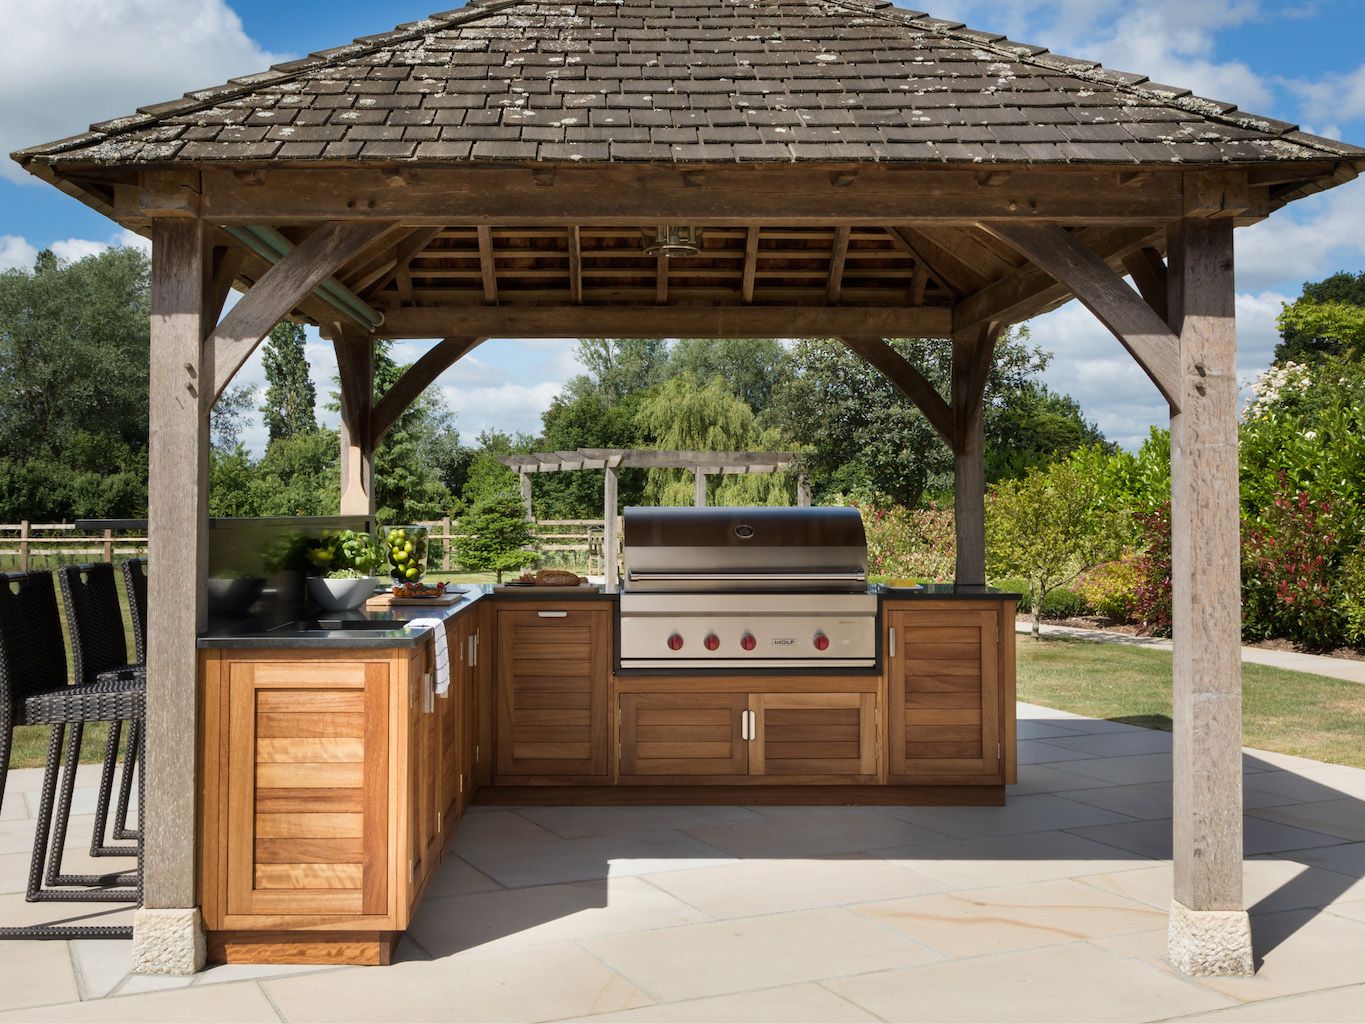 Essential design features to consider when designing your outdoor kitchen 